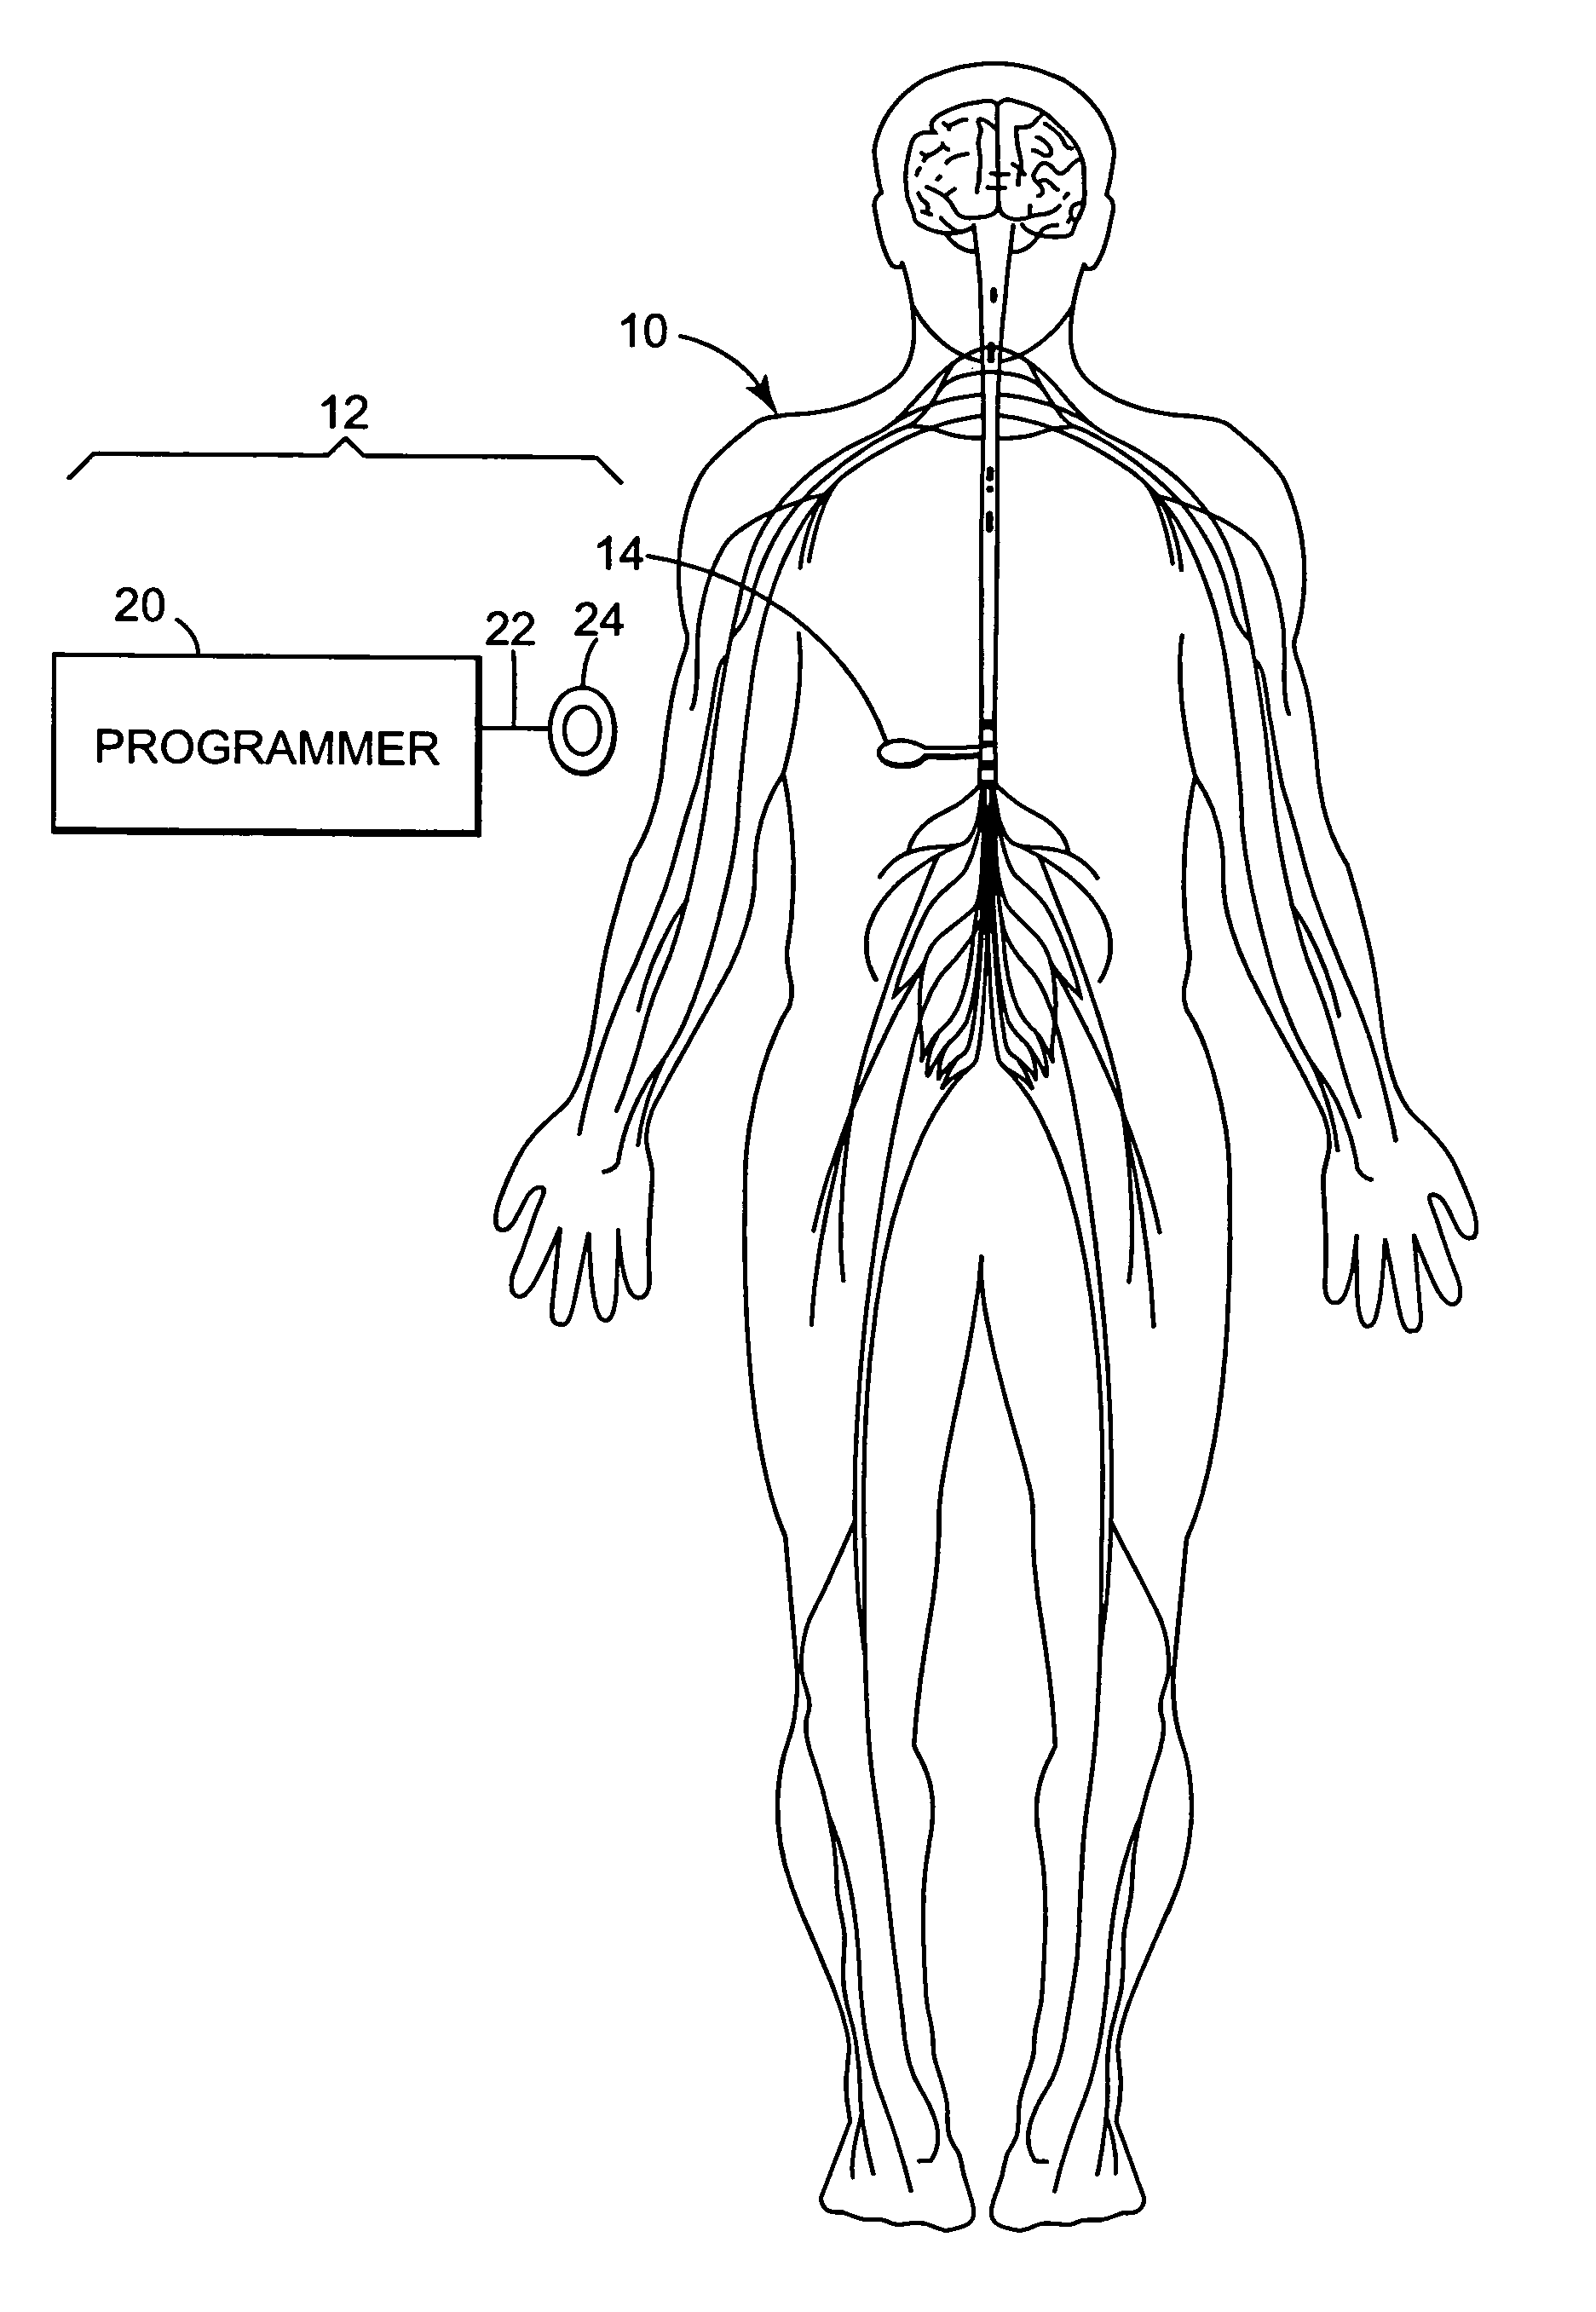 Method of delivering a fluid medication to a patient in flex mode